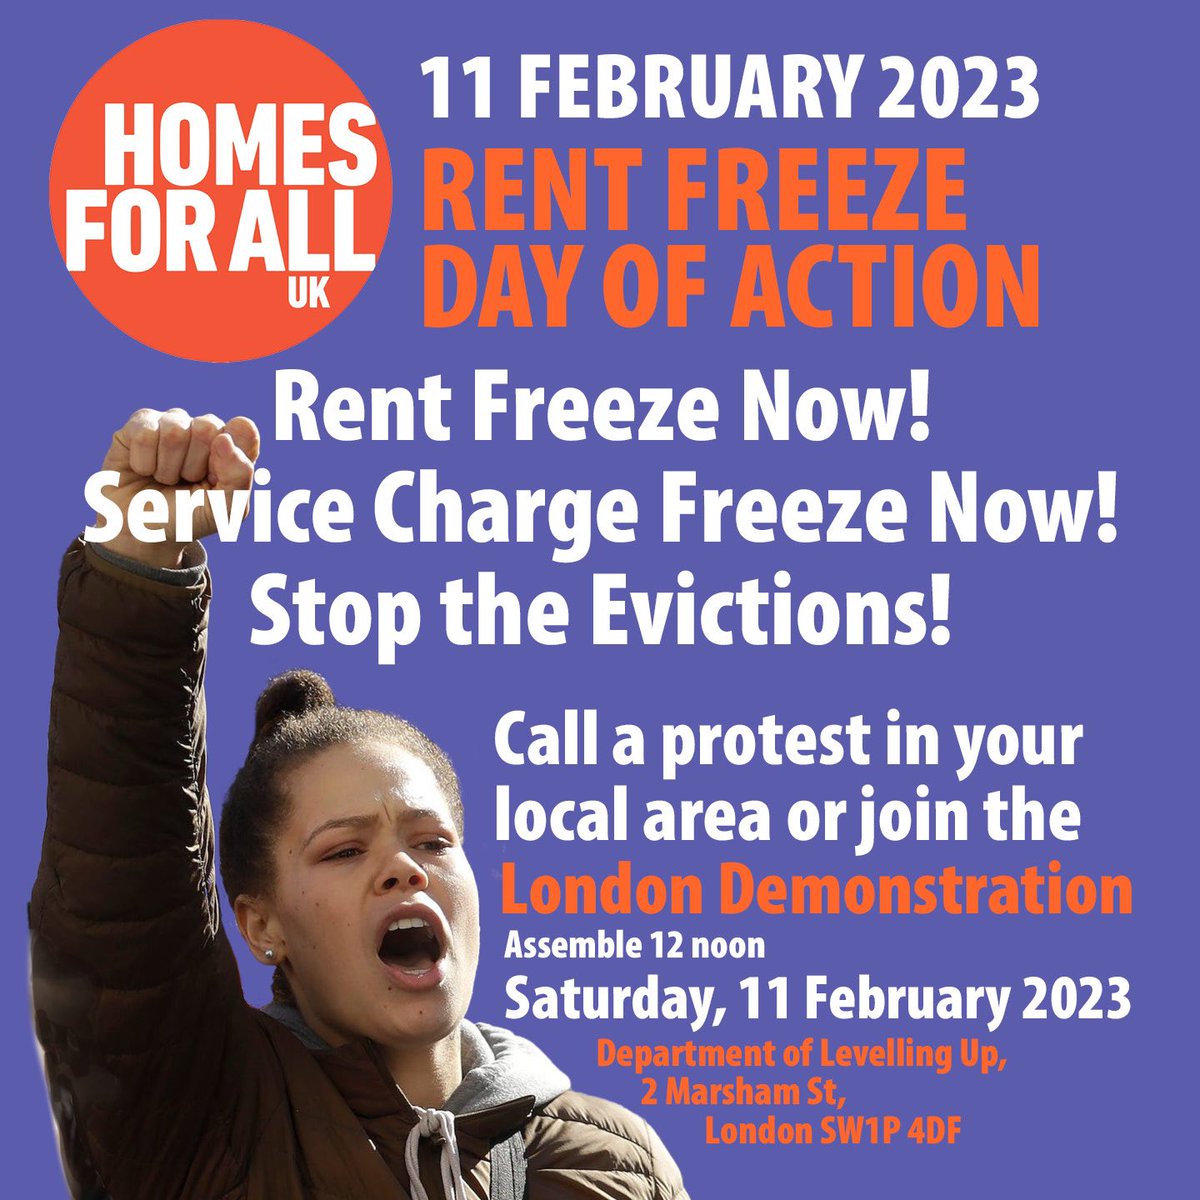 #RentFreezeNow Twitter storm today 9-11am - join in. 

#ServiceChargeFreeze
#StopEvictions 
#FundRepairs 

Racism, scapegoating and discrimination is at the centre of the #CostOfLivingCrisis & #HousingCrisis let’s build the resistance #EnoughIsEnough